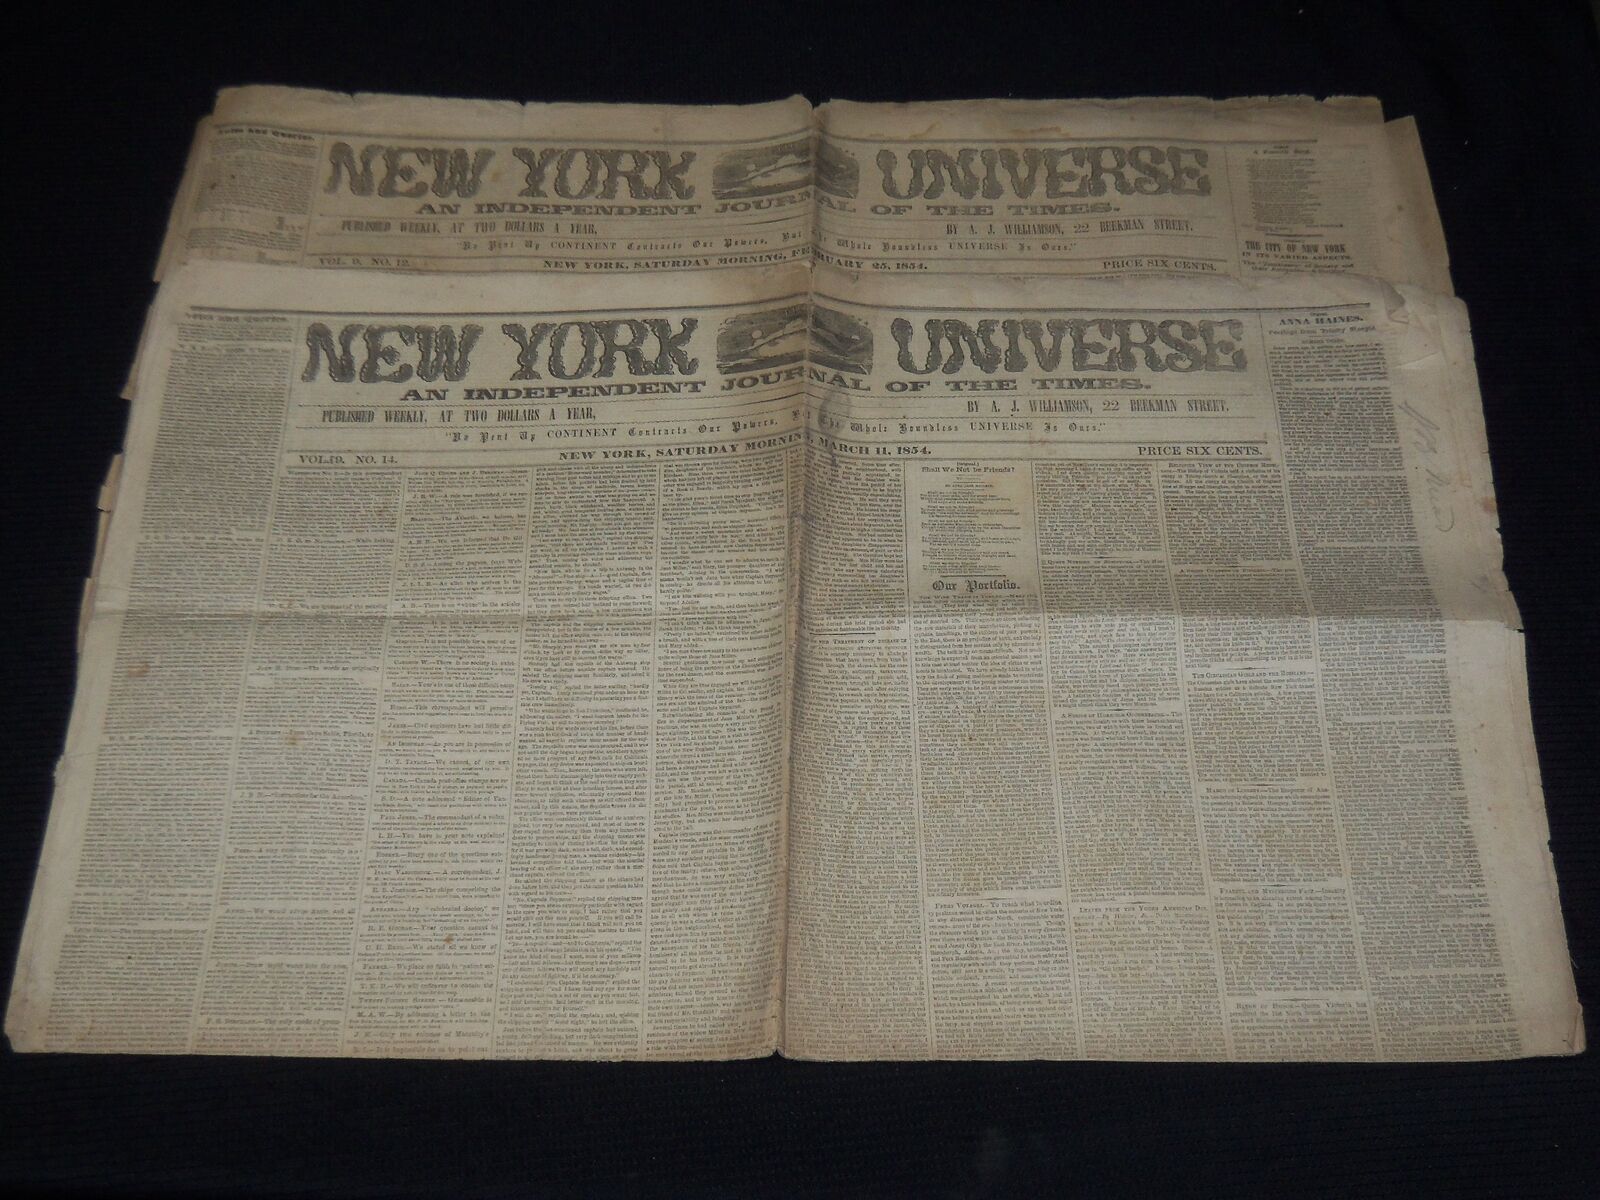 1854 NEW YORK UNIVERSE NEWSPAPERS LOT OF 2 - A. J. WILLIAMSON - NP 3879S